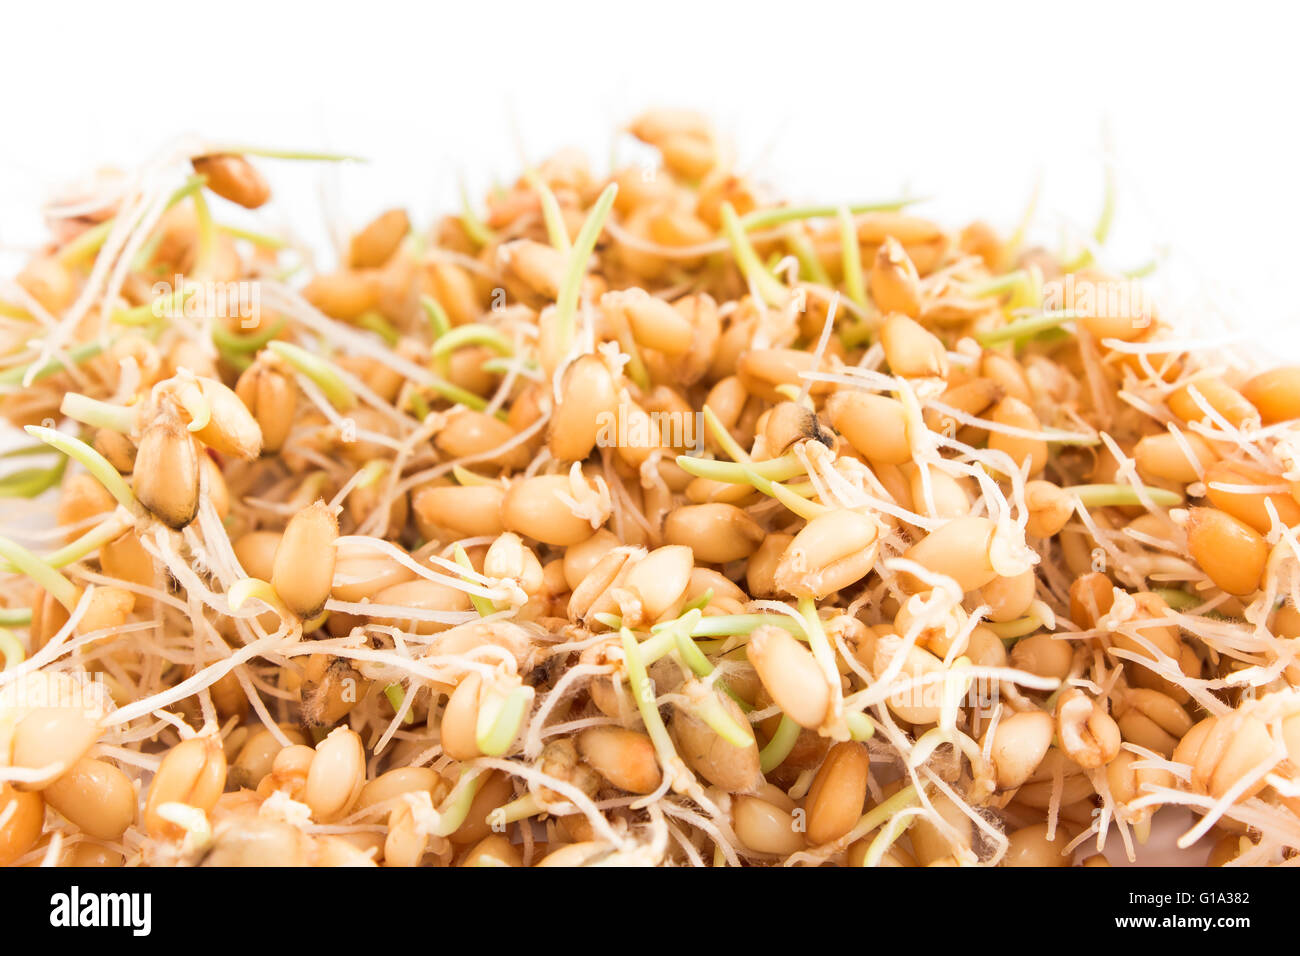 Sprouted wheat on a white background. Stock Photo